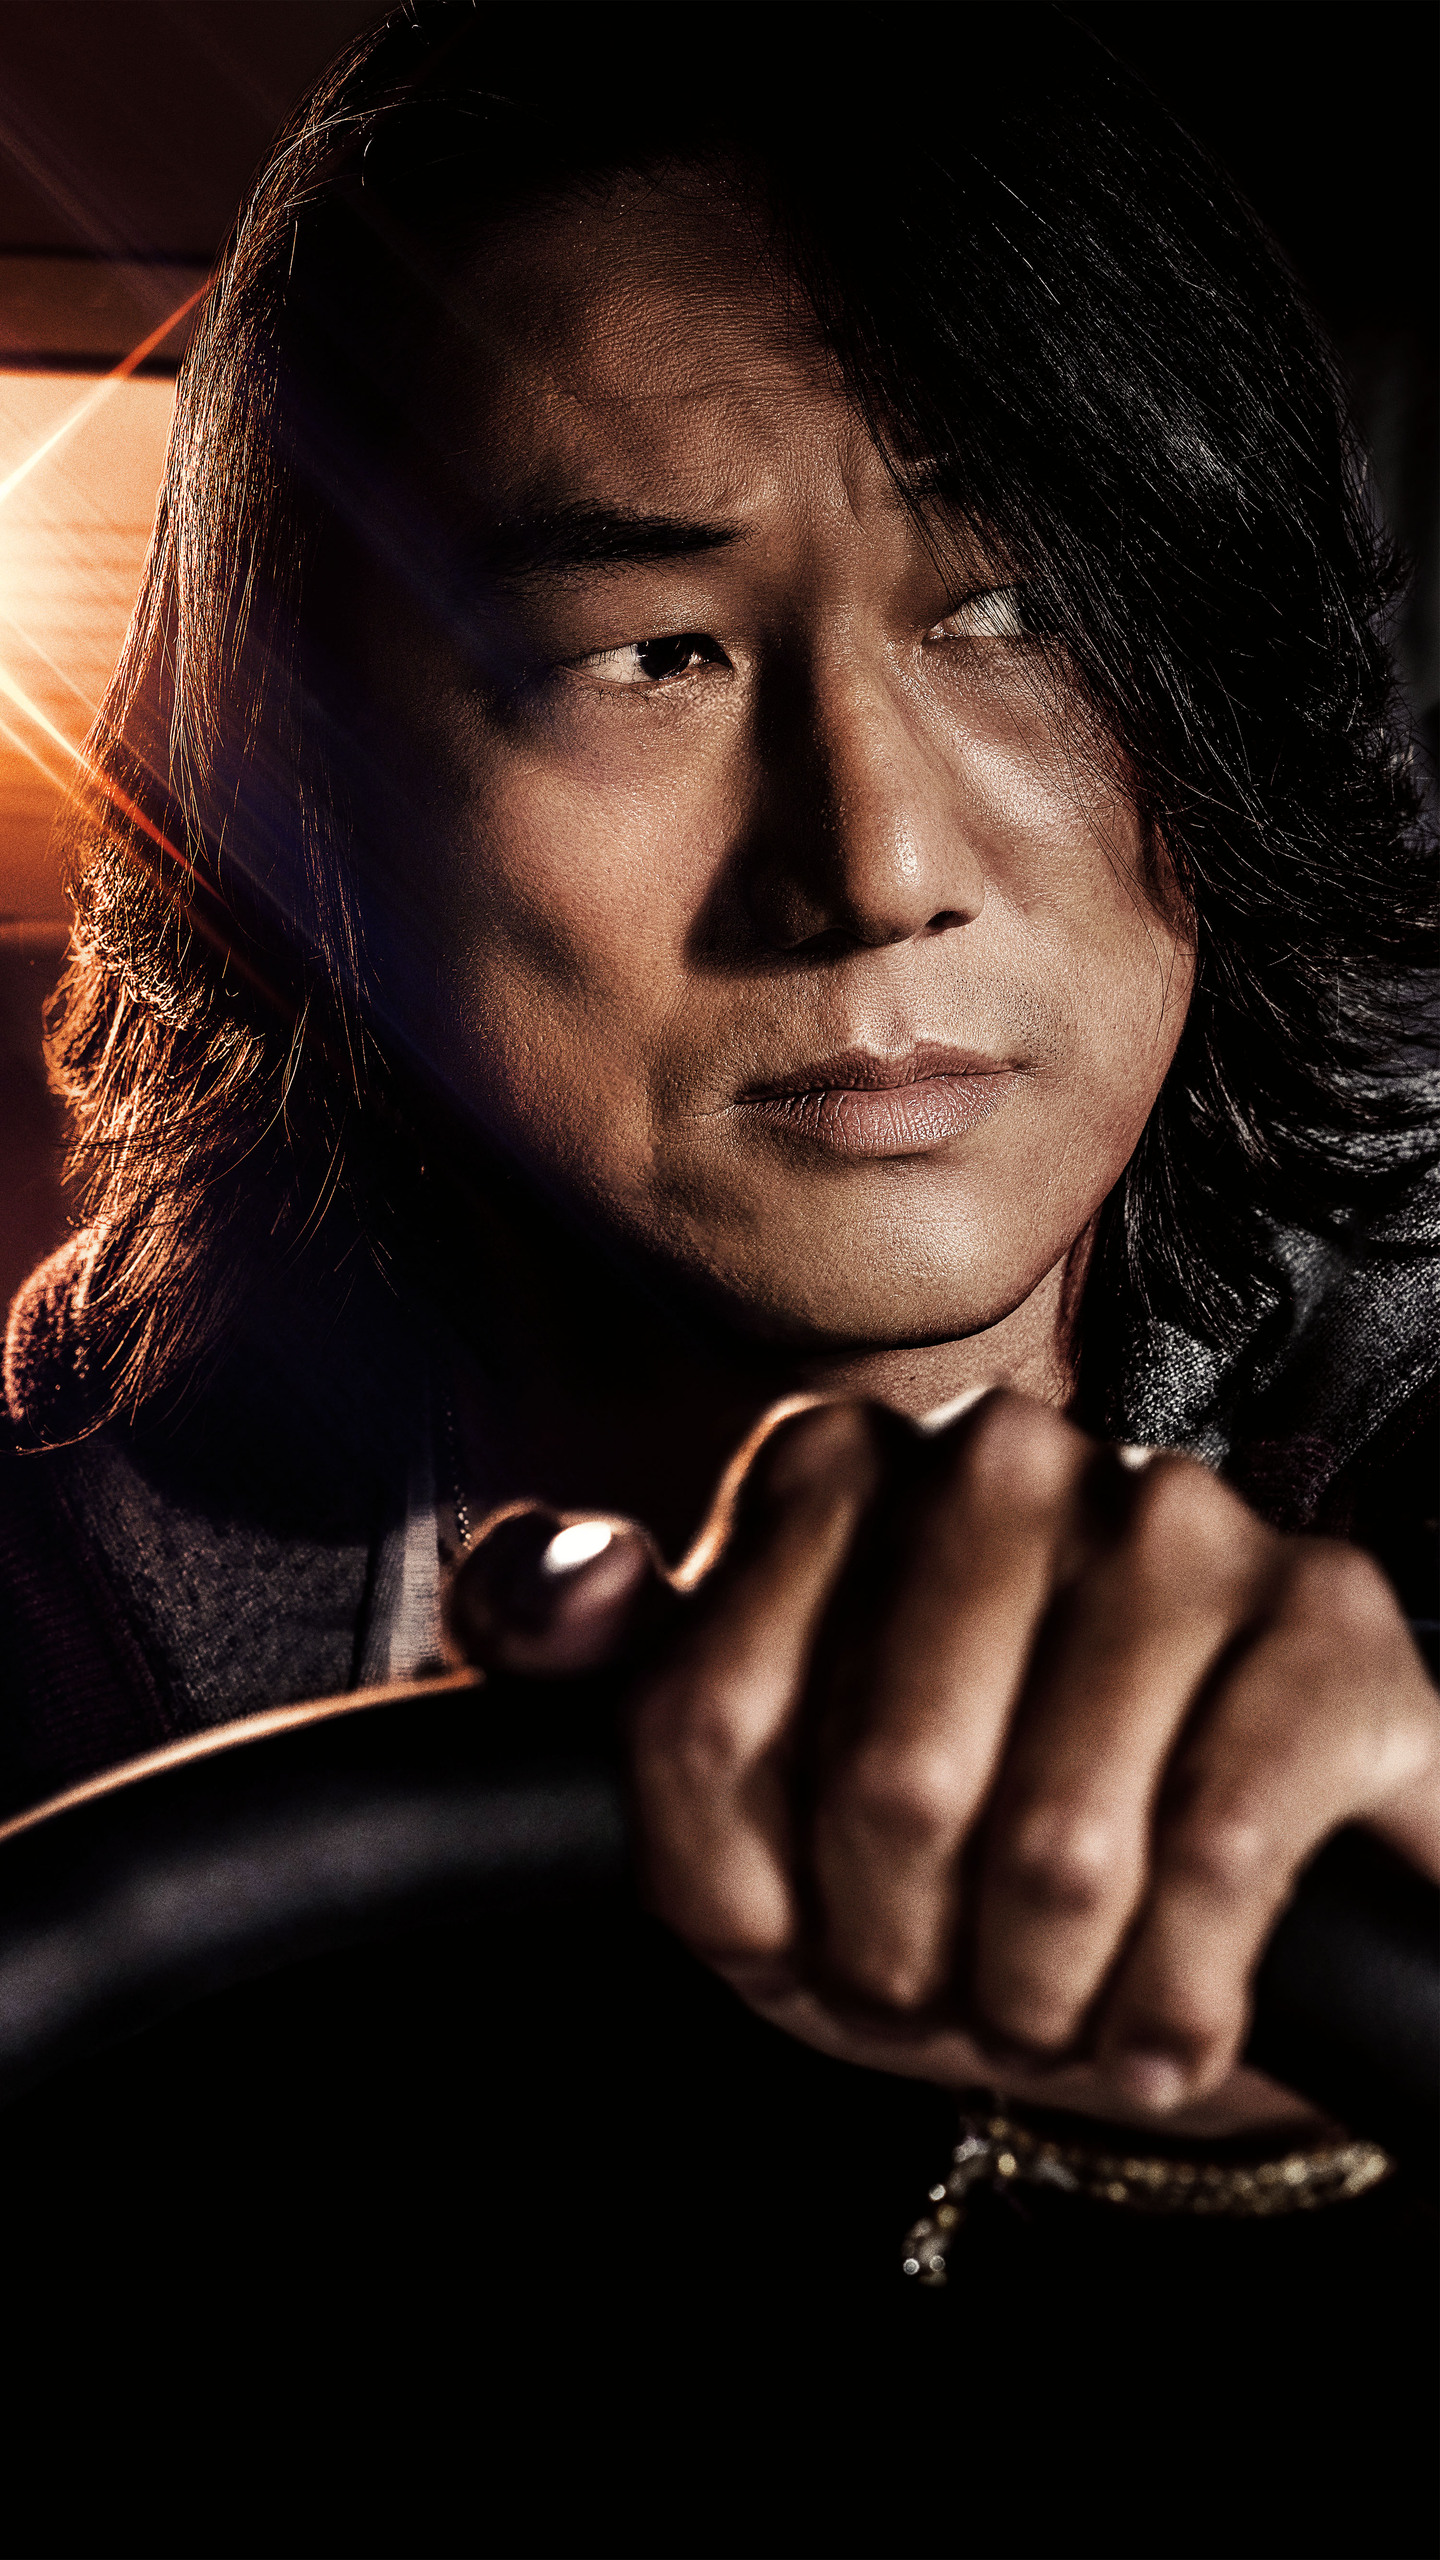 Sung Kang Photo on myCast - Fan Casting Your Favorite Stories